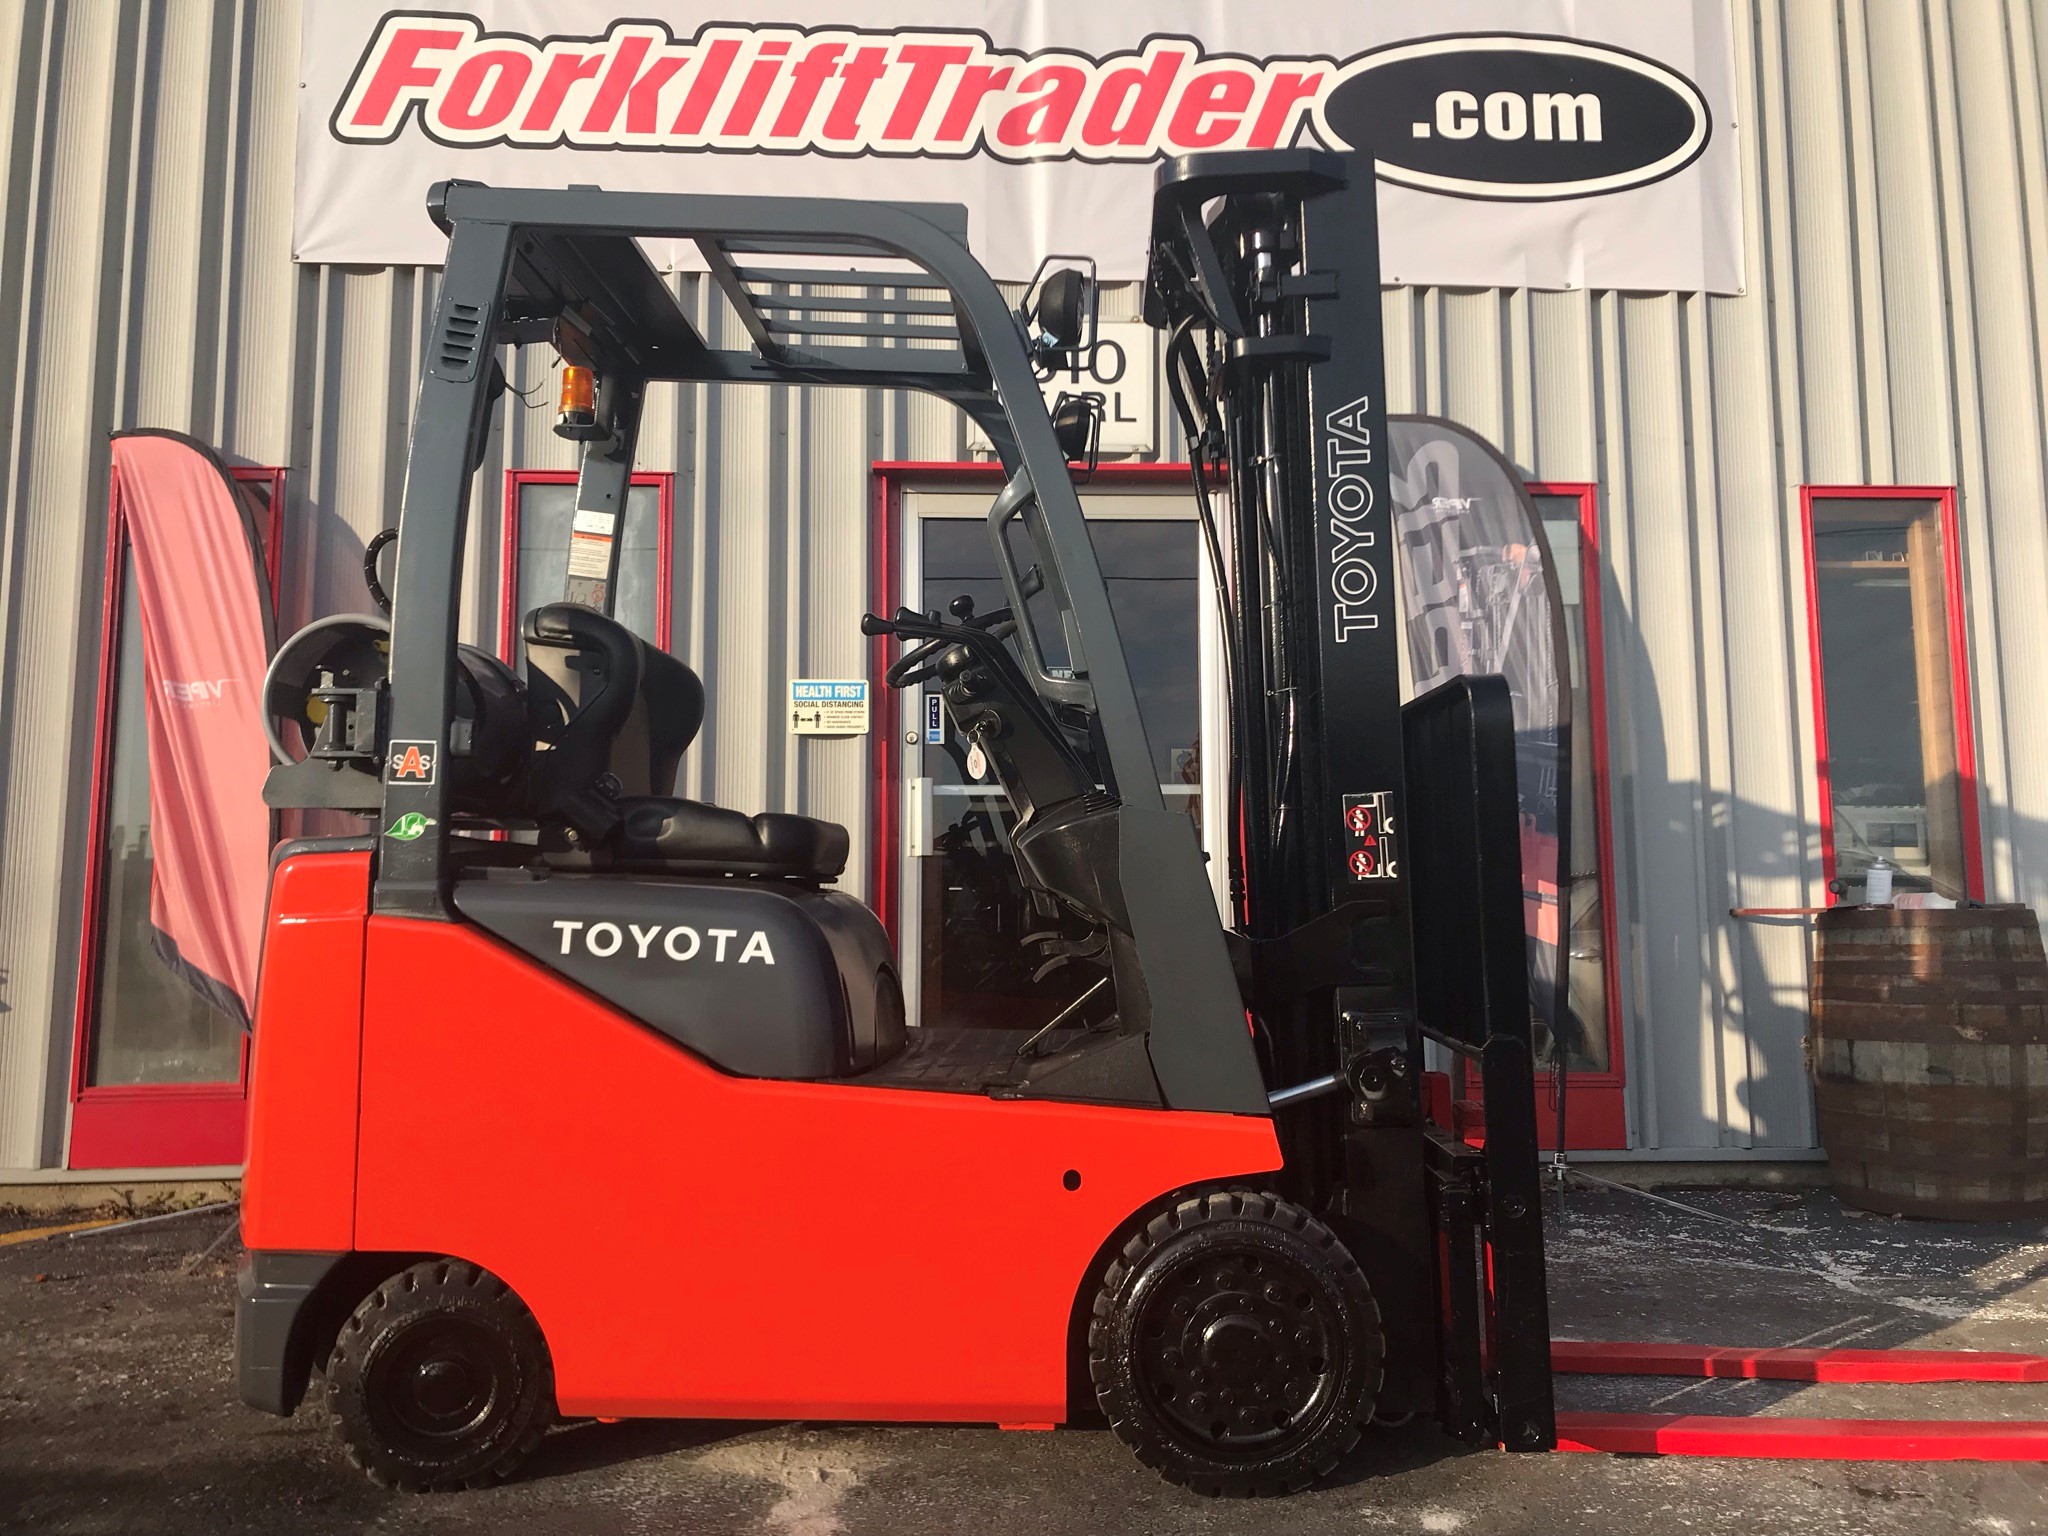 189" lift height red toyota forklift for sale